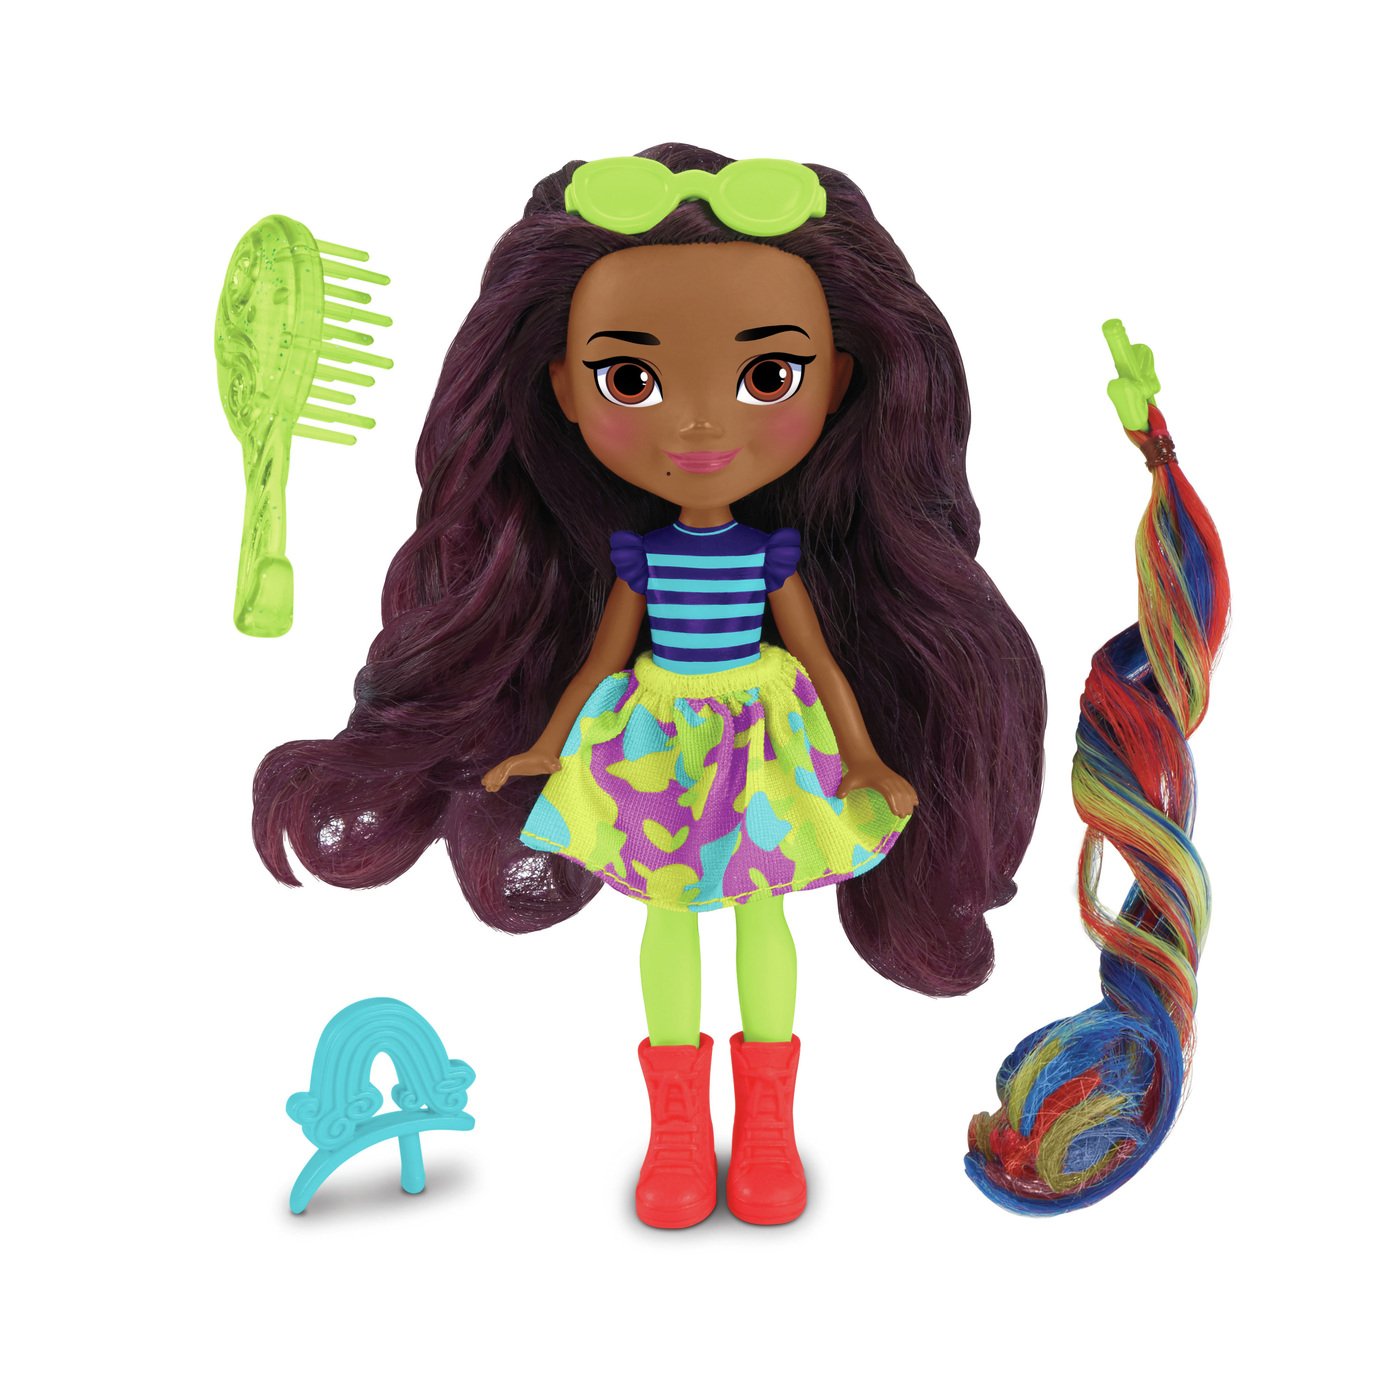 Nickelodeon Sunny Day Pop-In Style Rox Doll